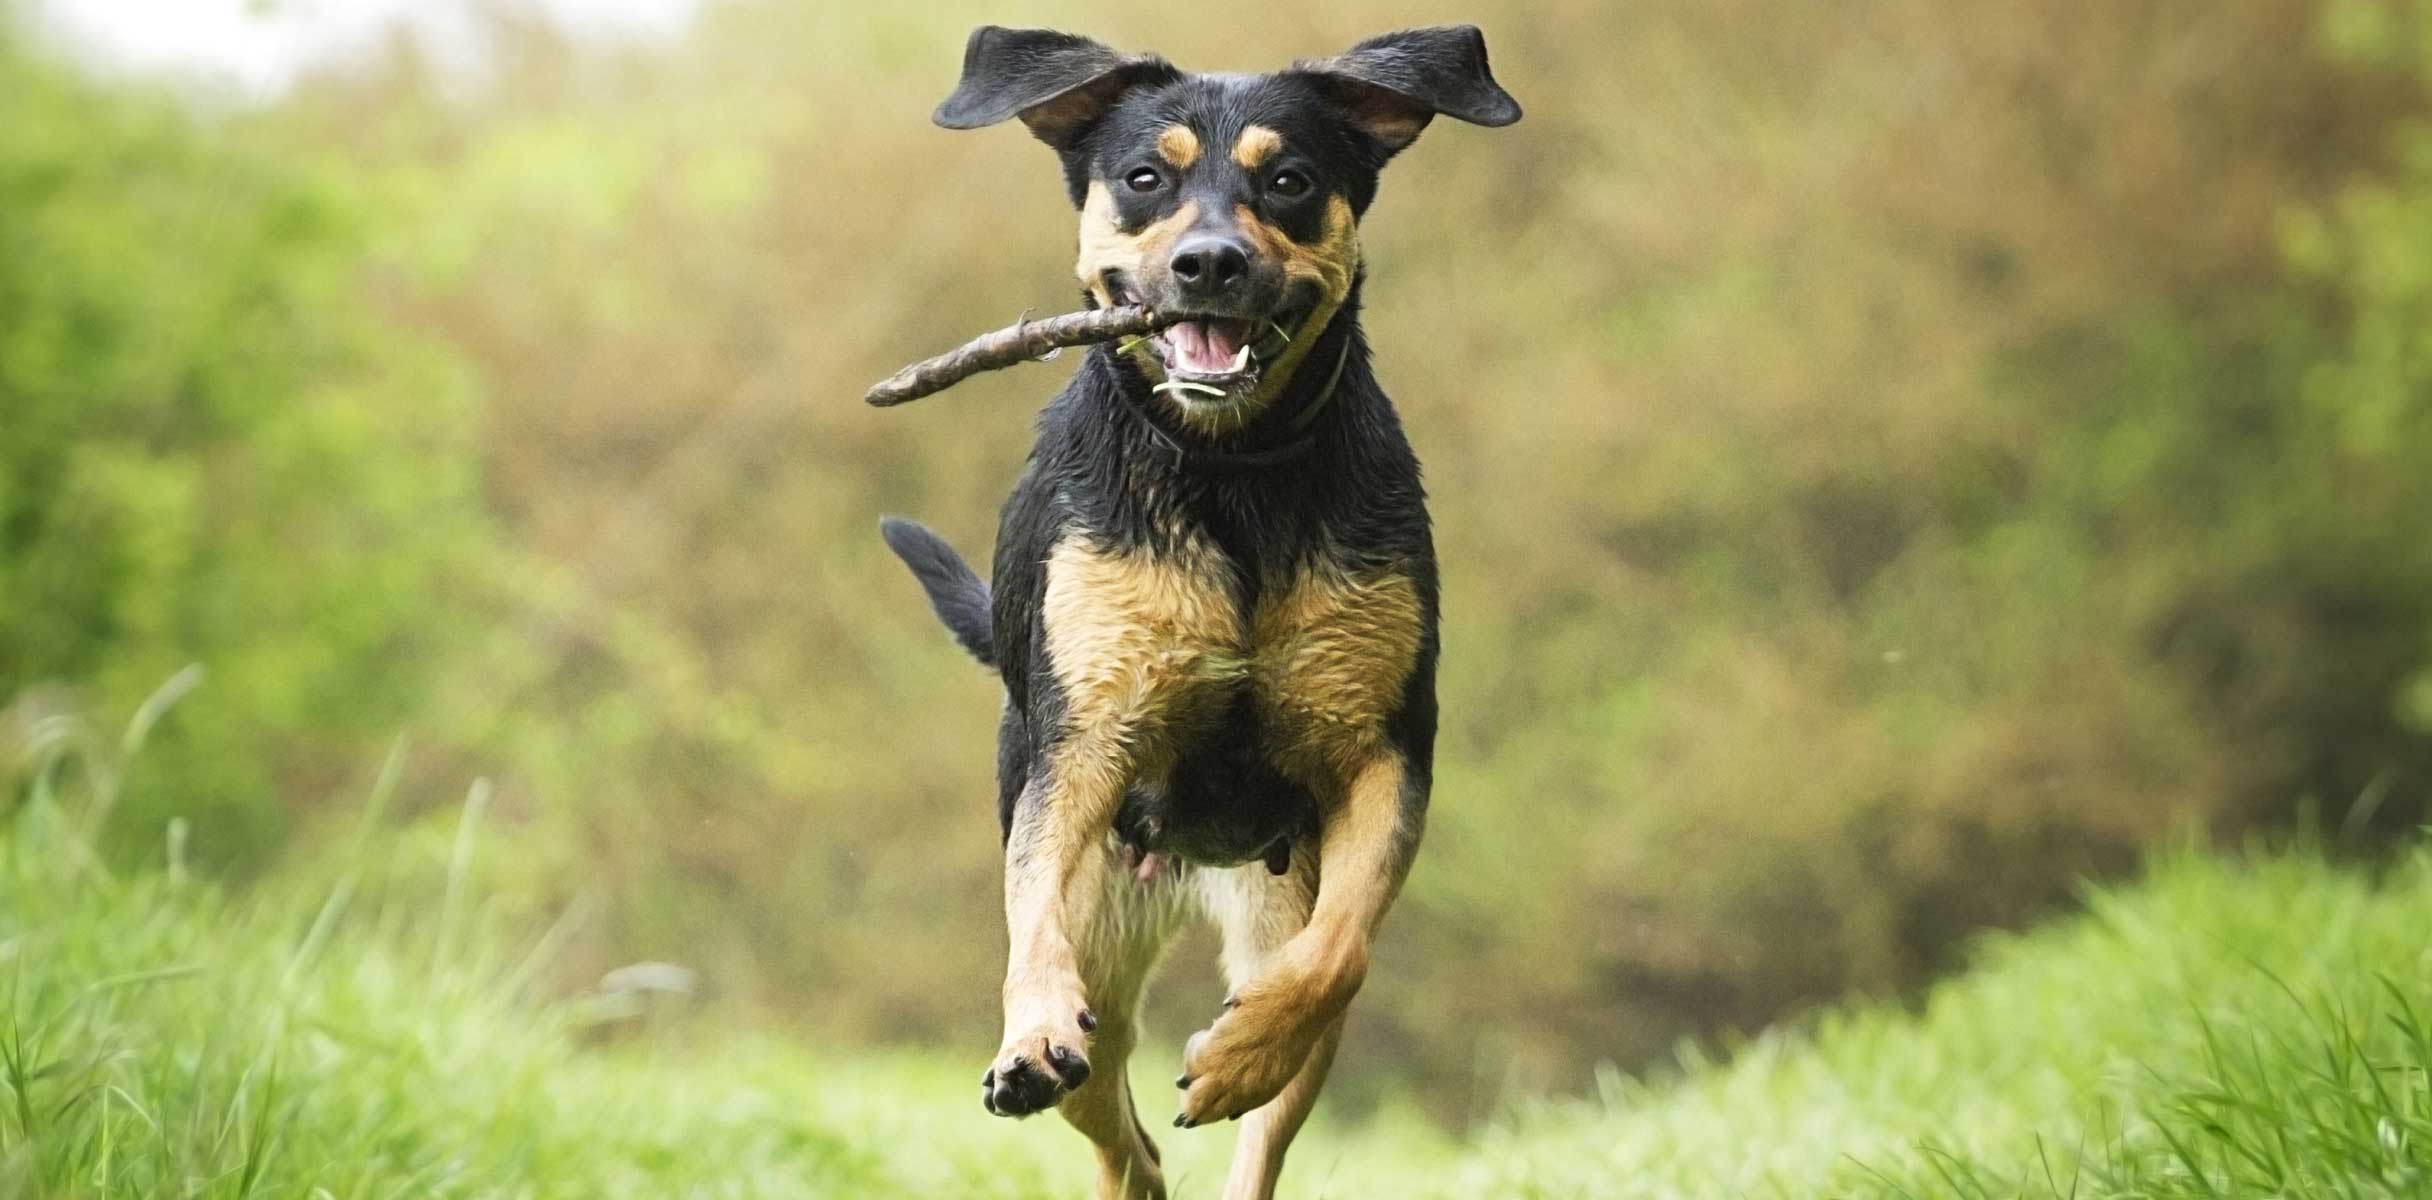 Dog running with a stick